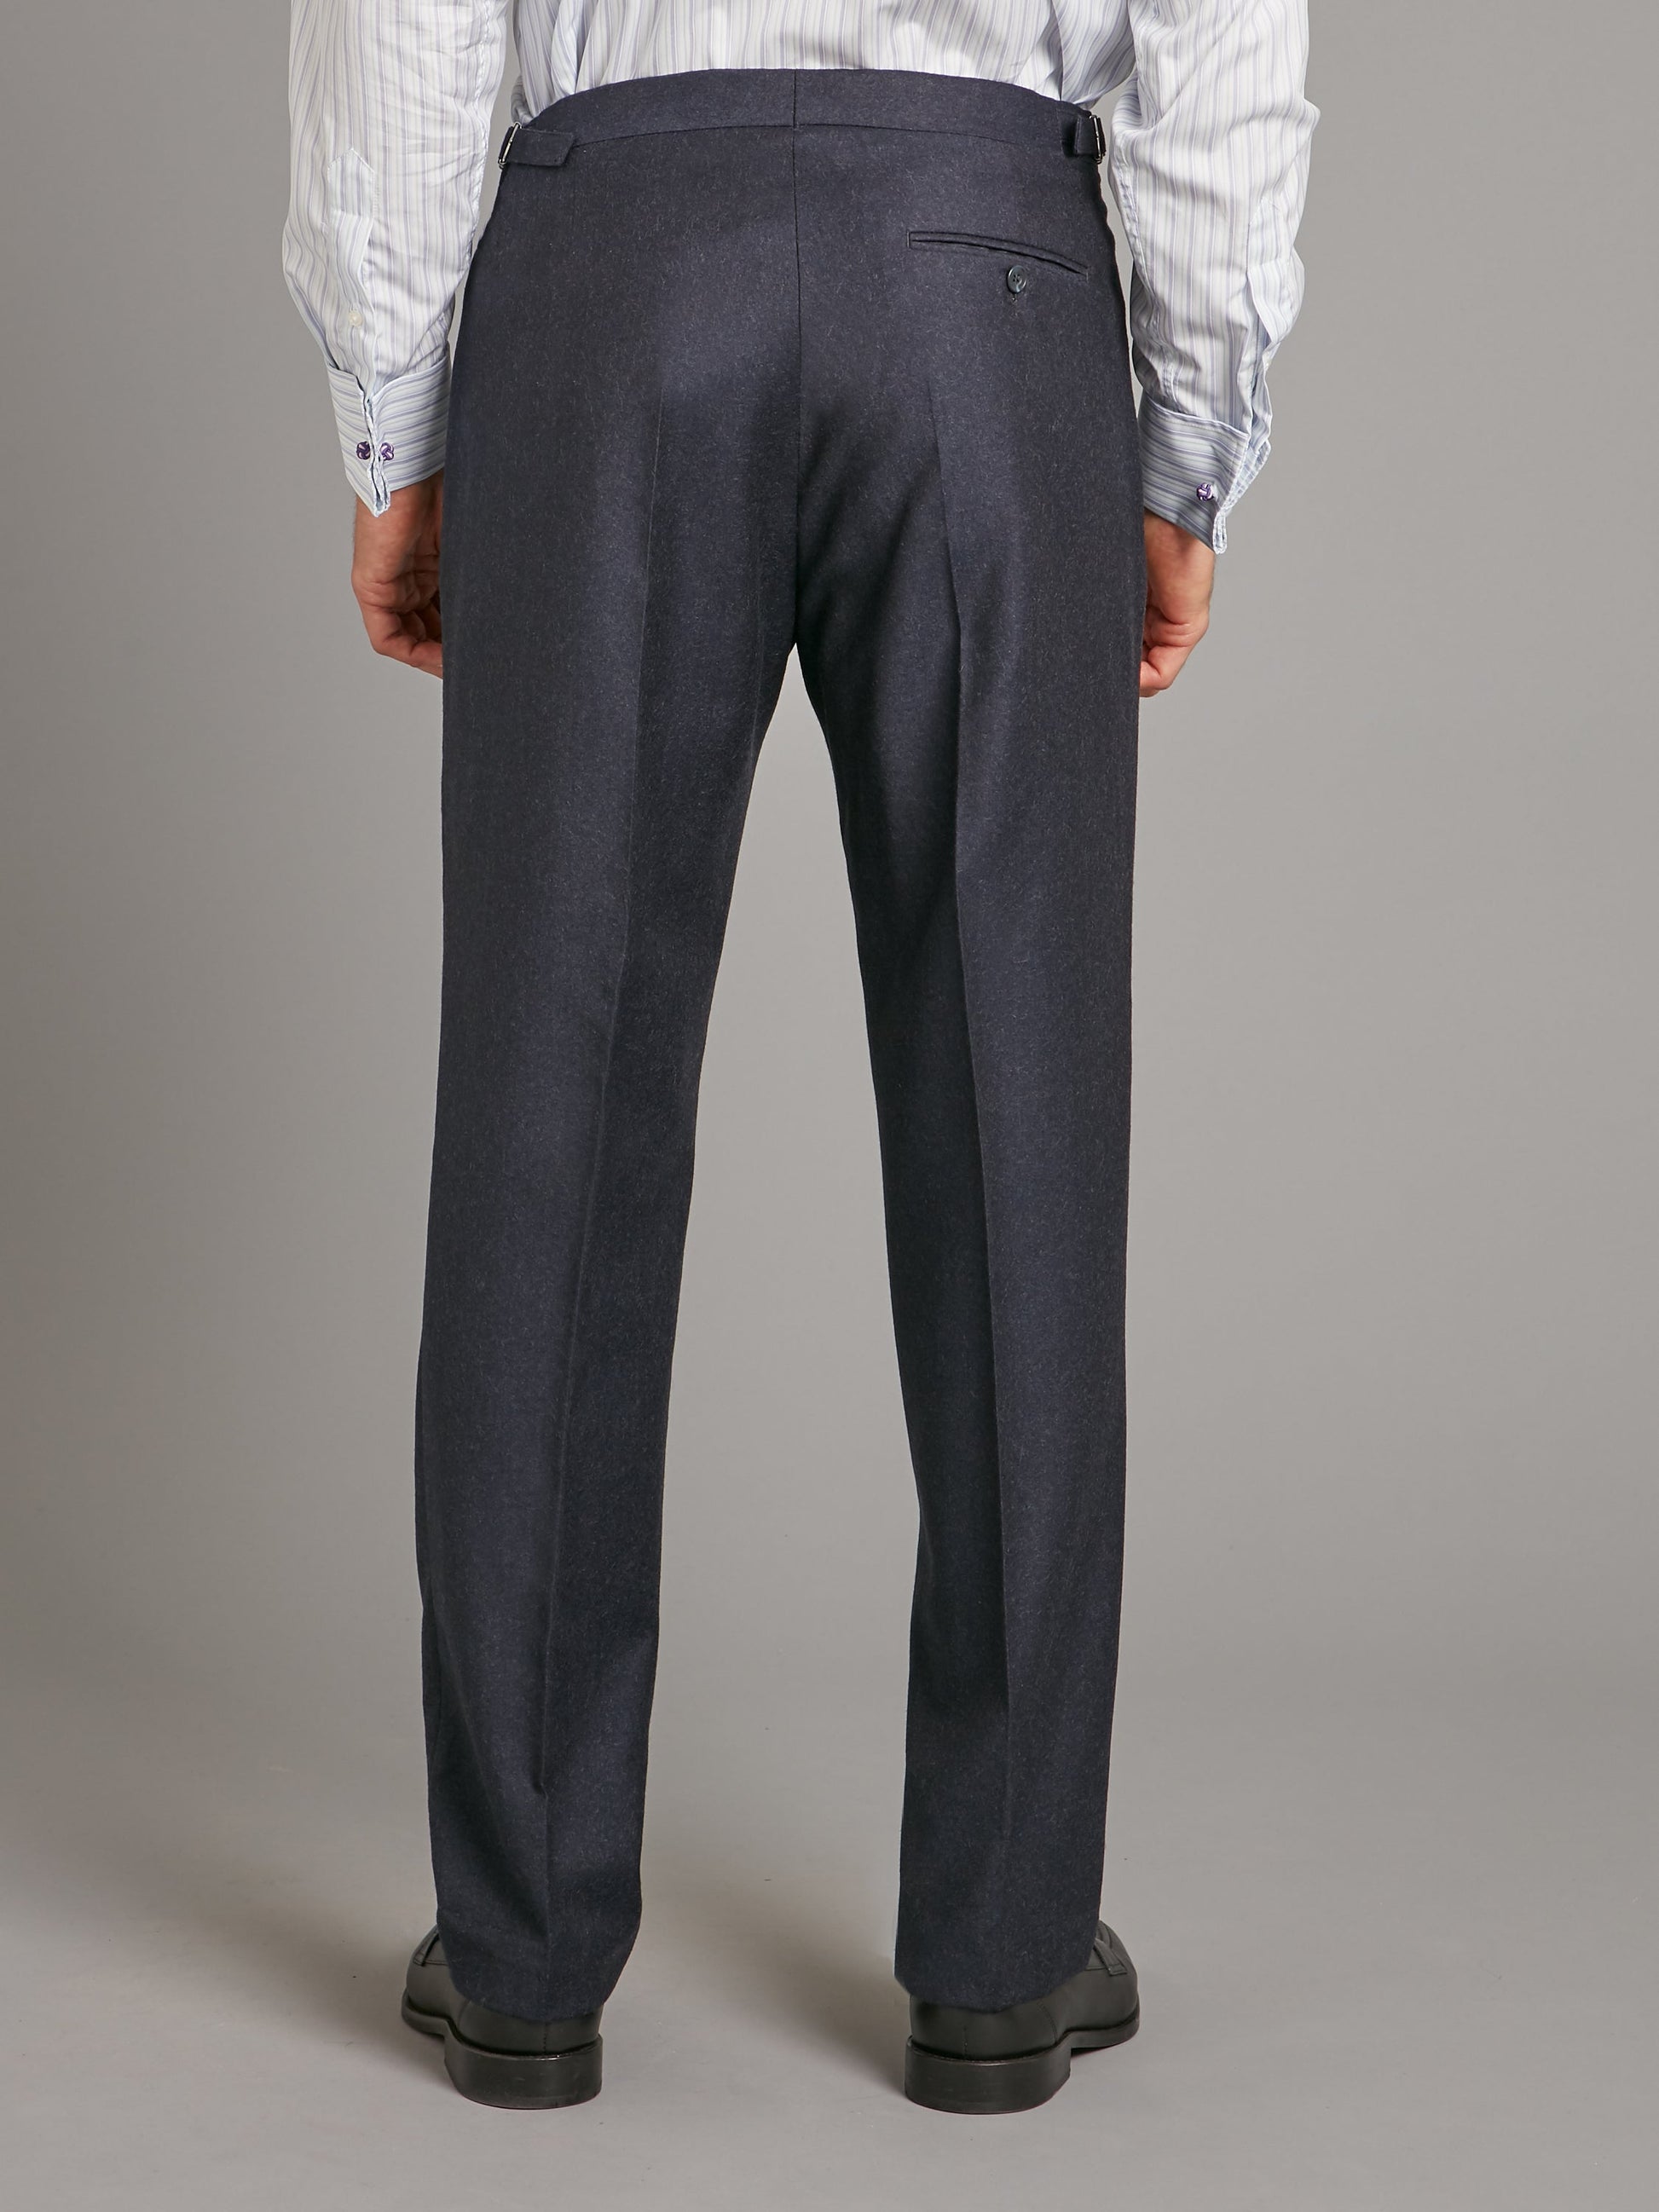 pleated suit trousers navy flannel 2